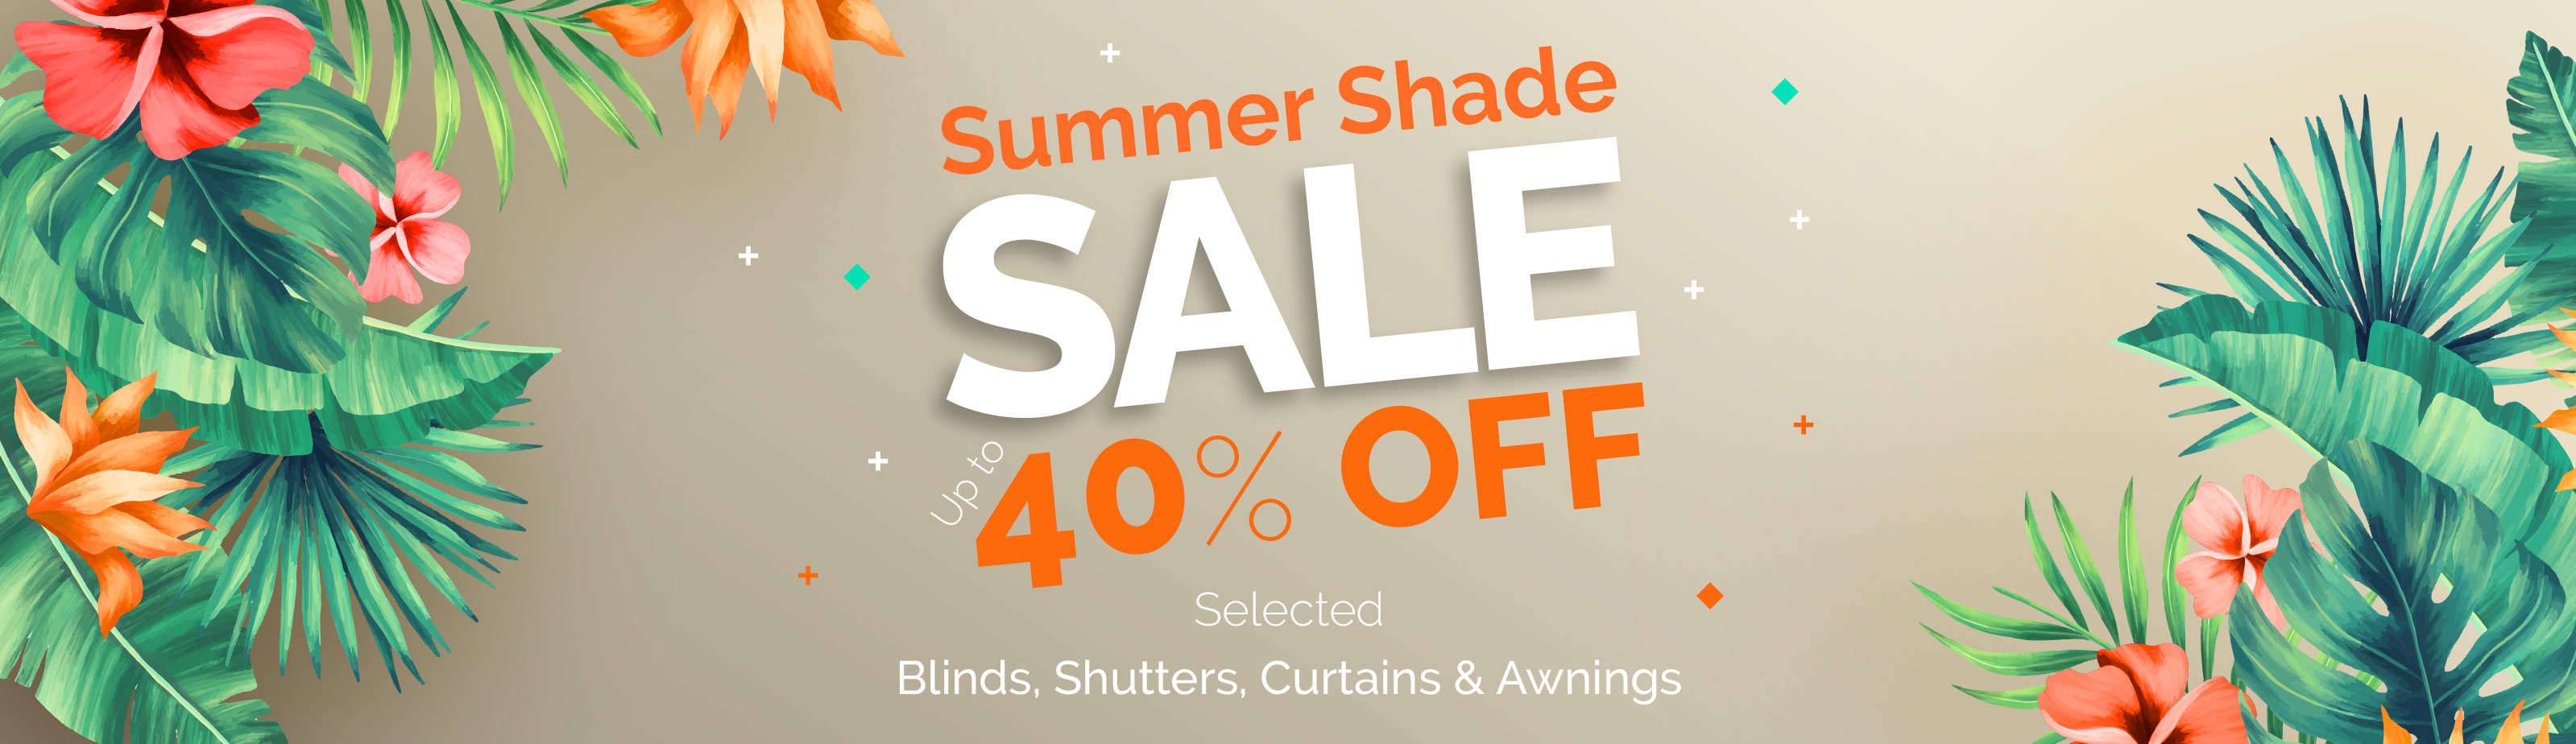 Amaru Specials Summer shade sale on selected Blinds, Shutters, Curtains & Awnings